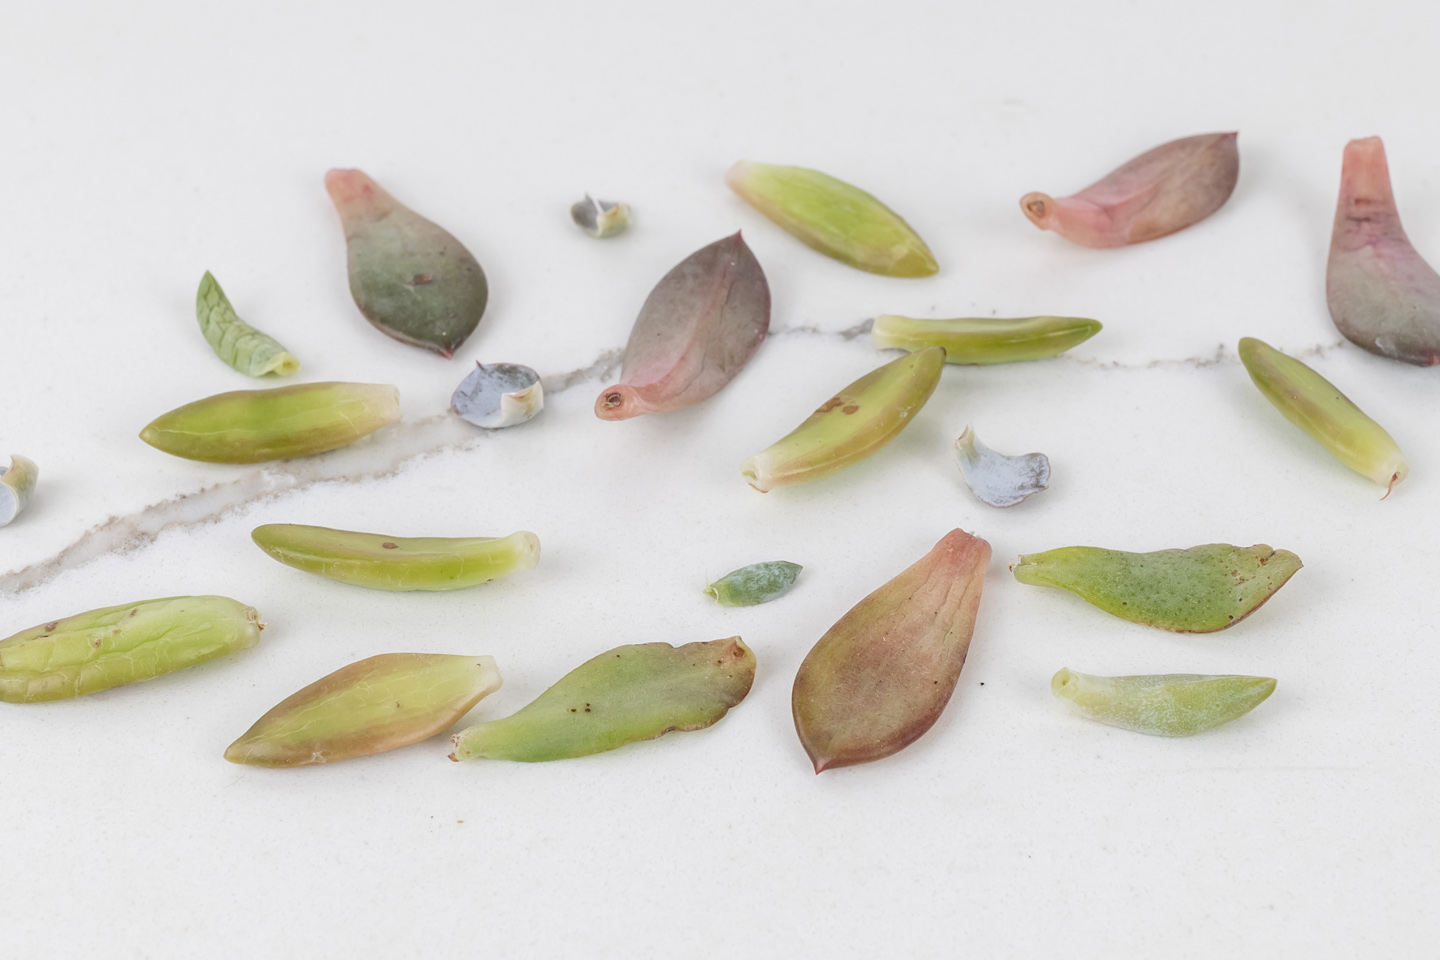 Learn how to propagate succulents using just a leaf taken from an existing plant! This is both really neat and a great way to grow yourself some free plants!